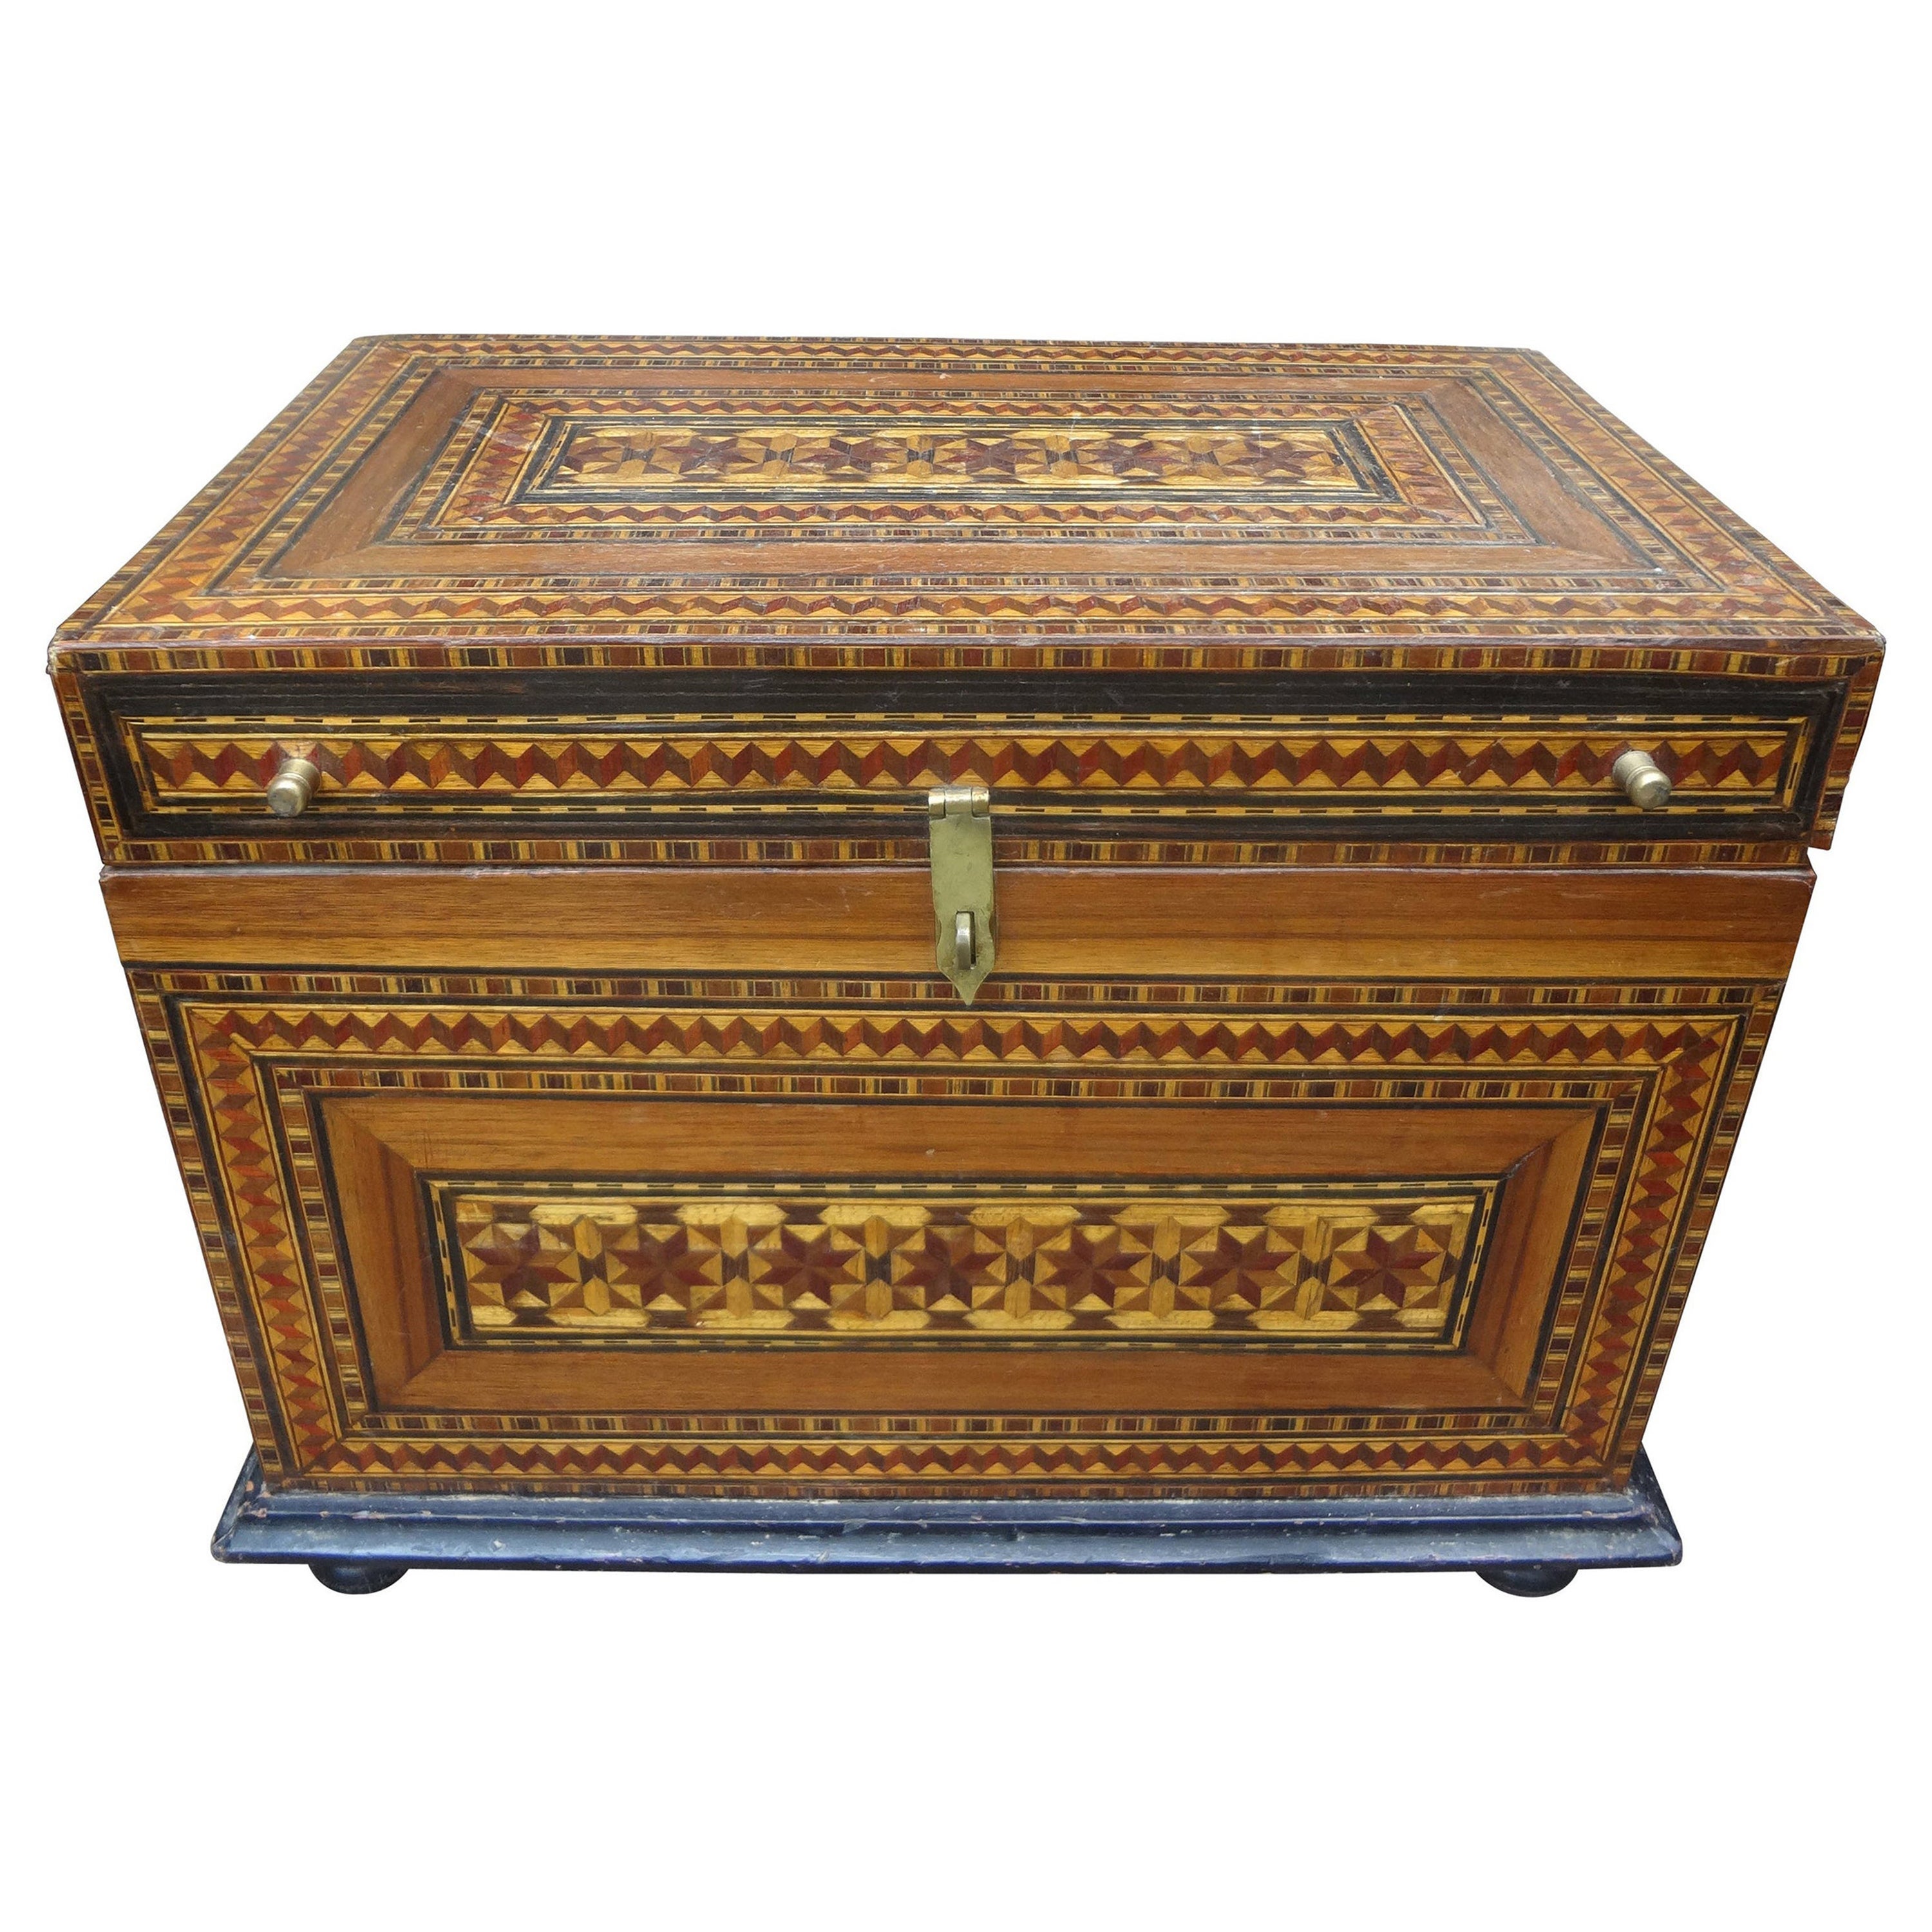 Antique Moroccan Coffer, Trunk or Box For Sale